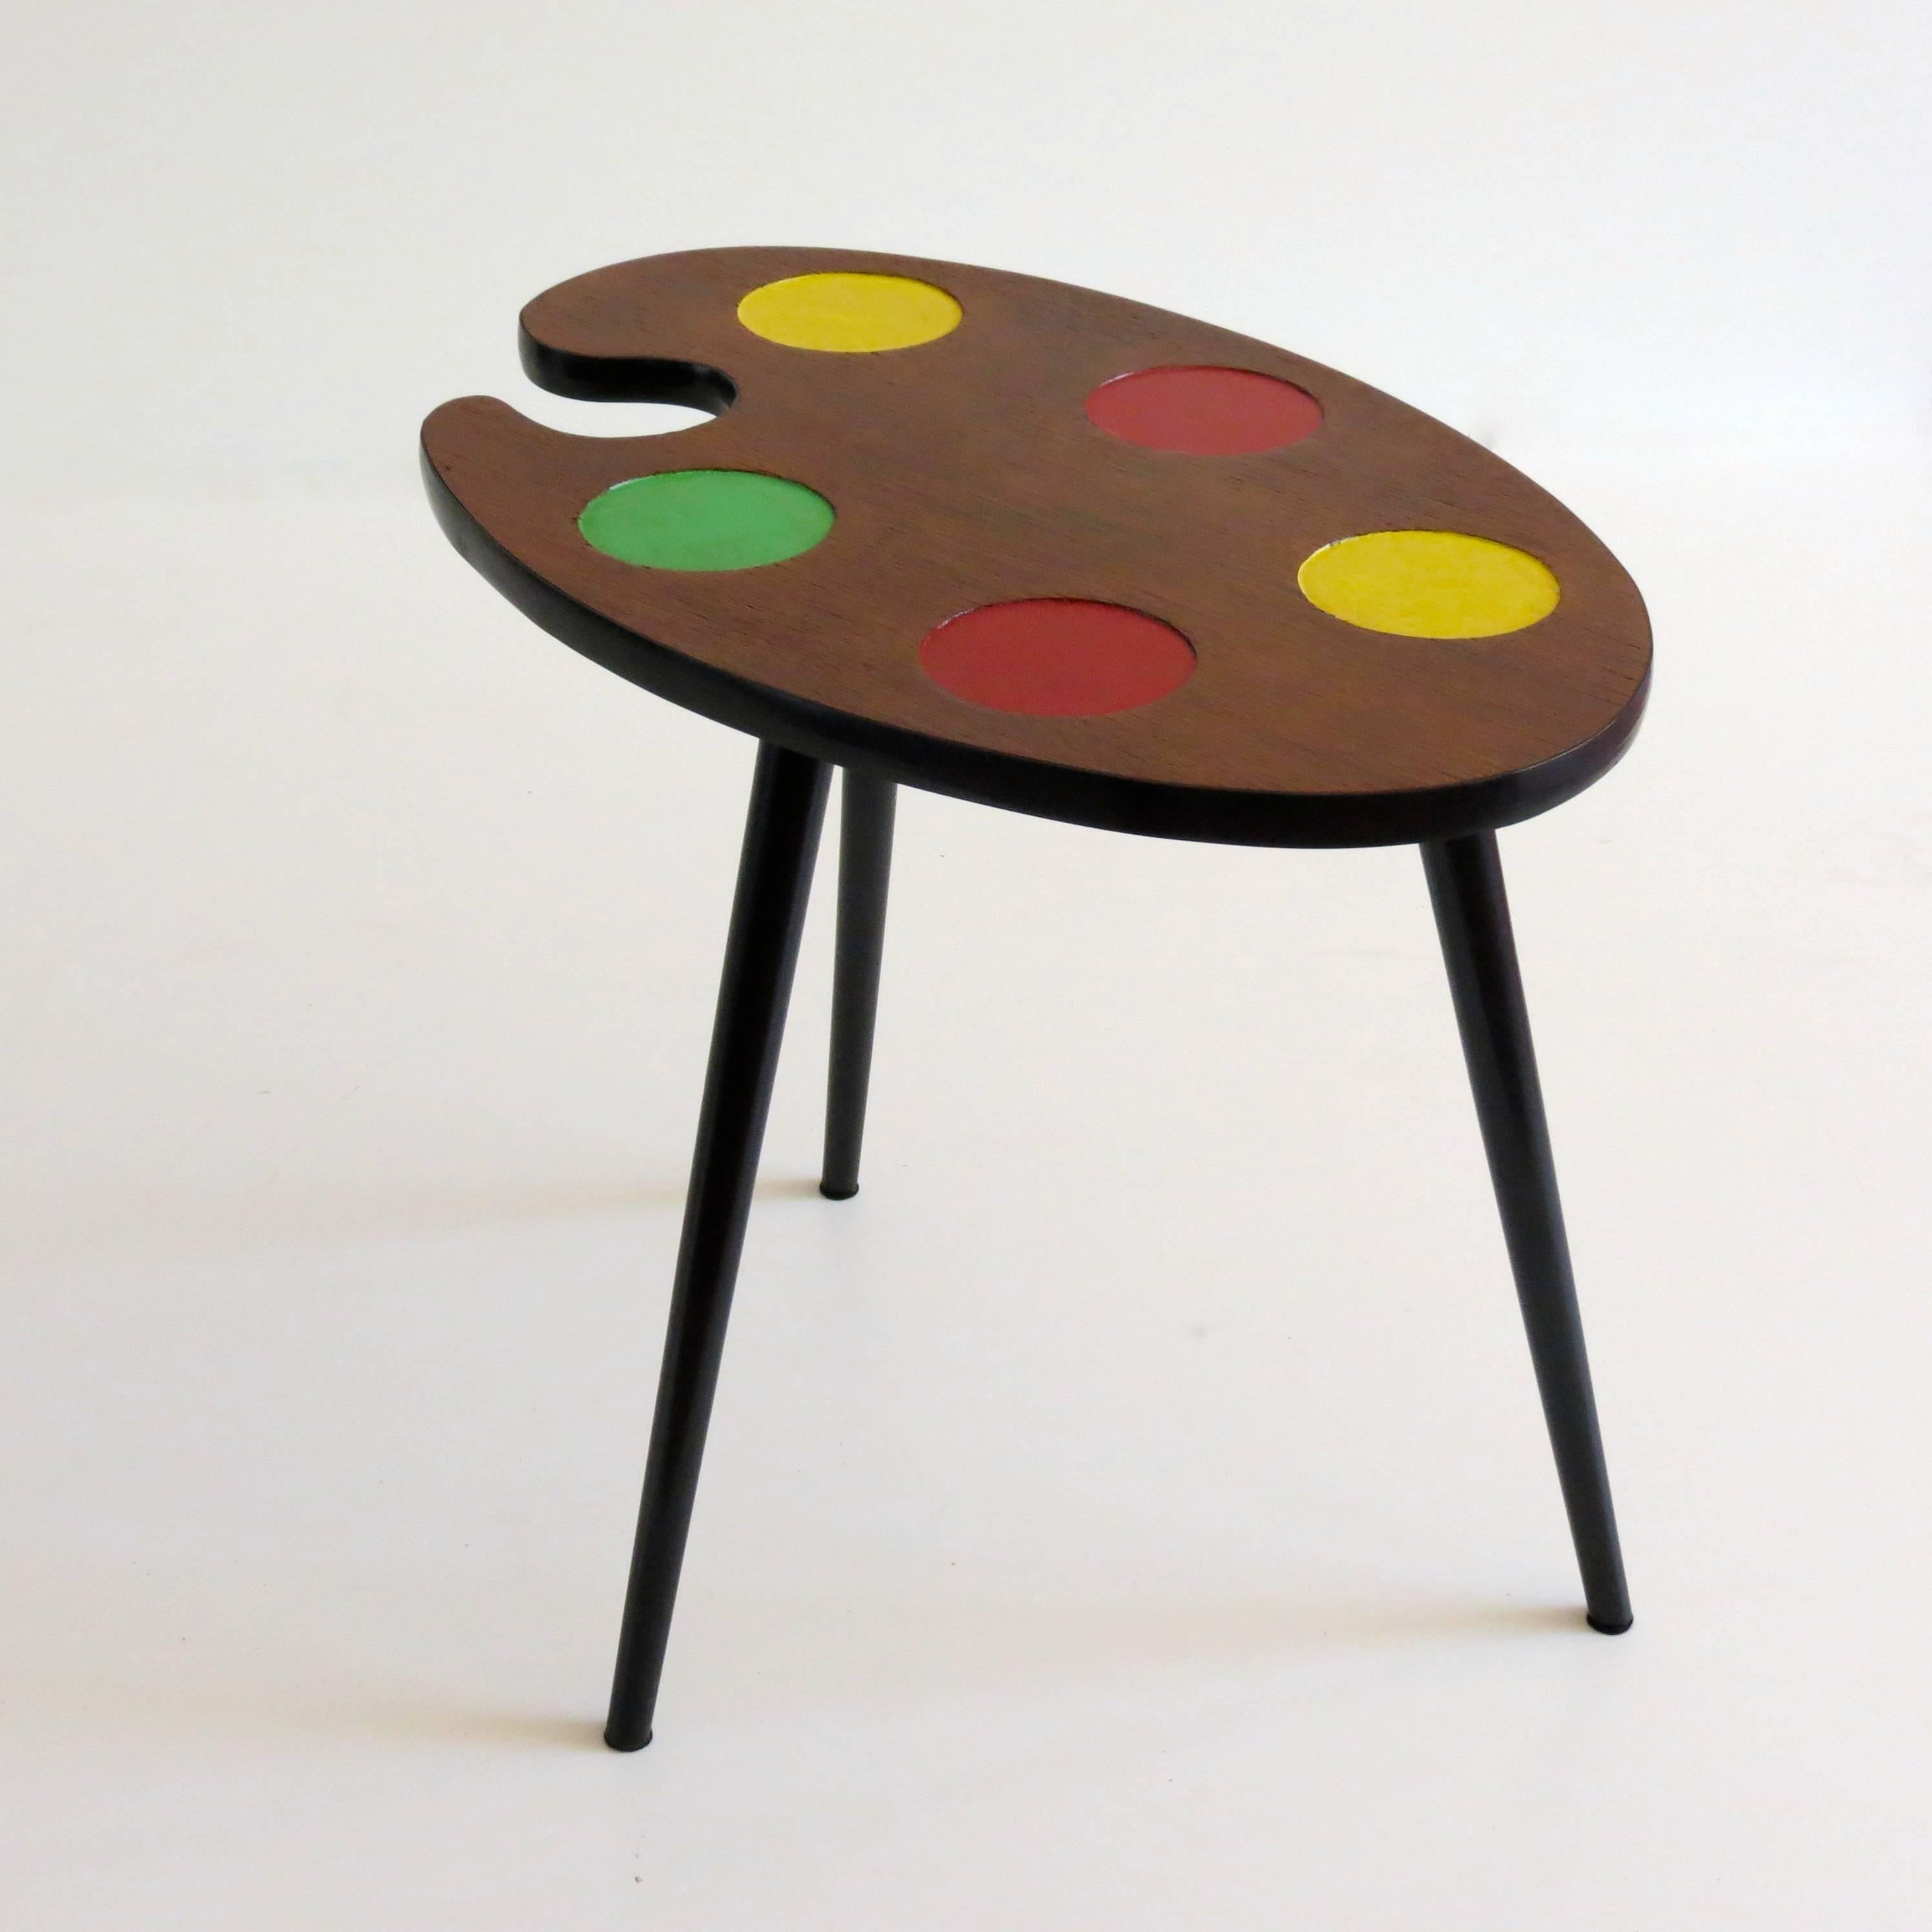 Original and fine Italian palette coffee table, circa 1950
three legs
walnut, lacquered wood and colored wood
very good original condition
Measures: height 51 cm, top height 2.5cm, diameter max 62 cm.